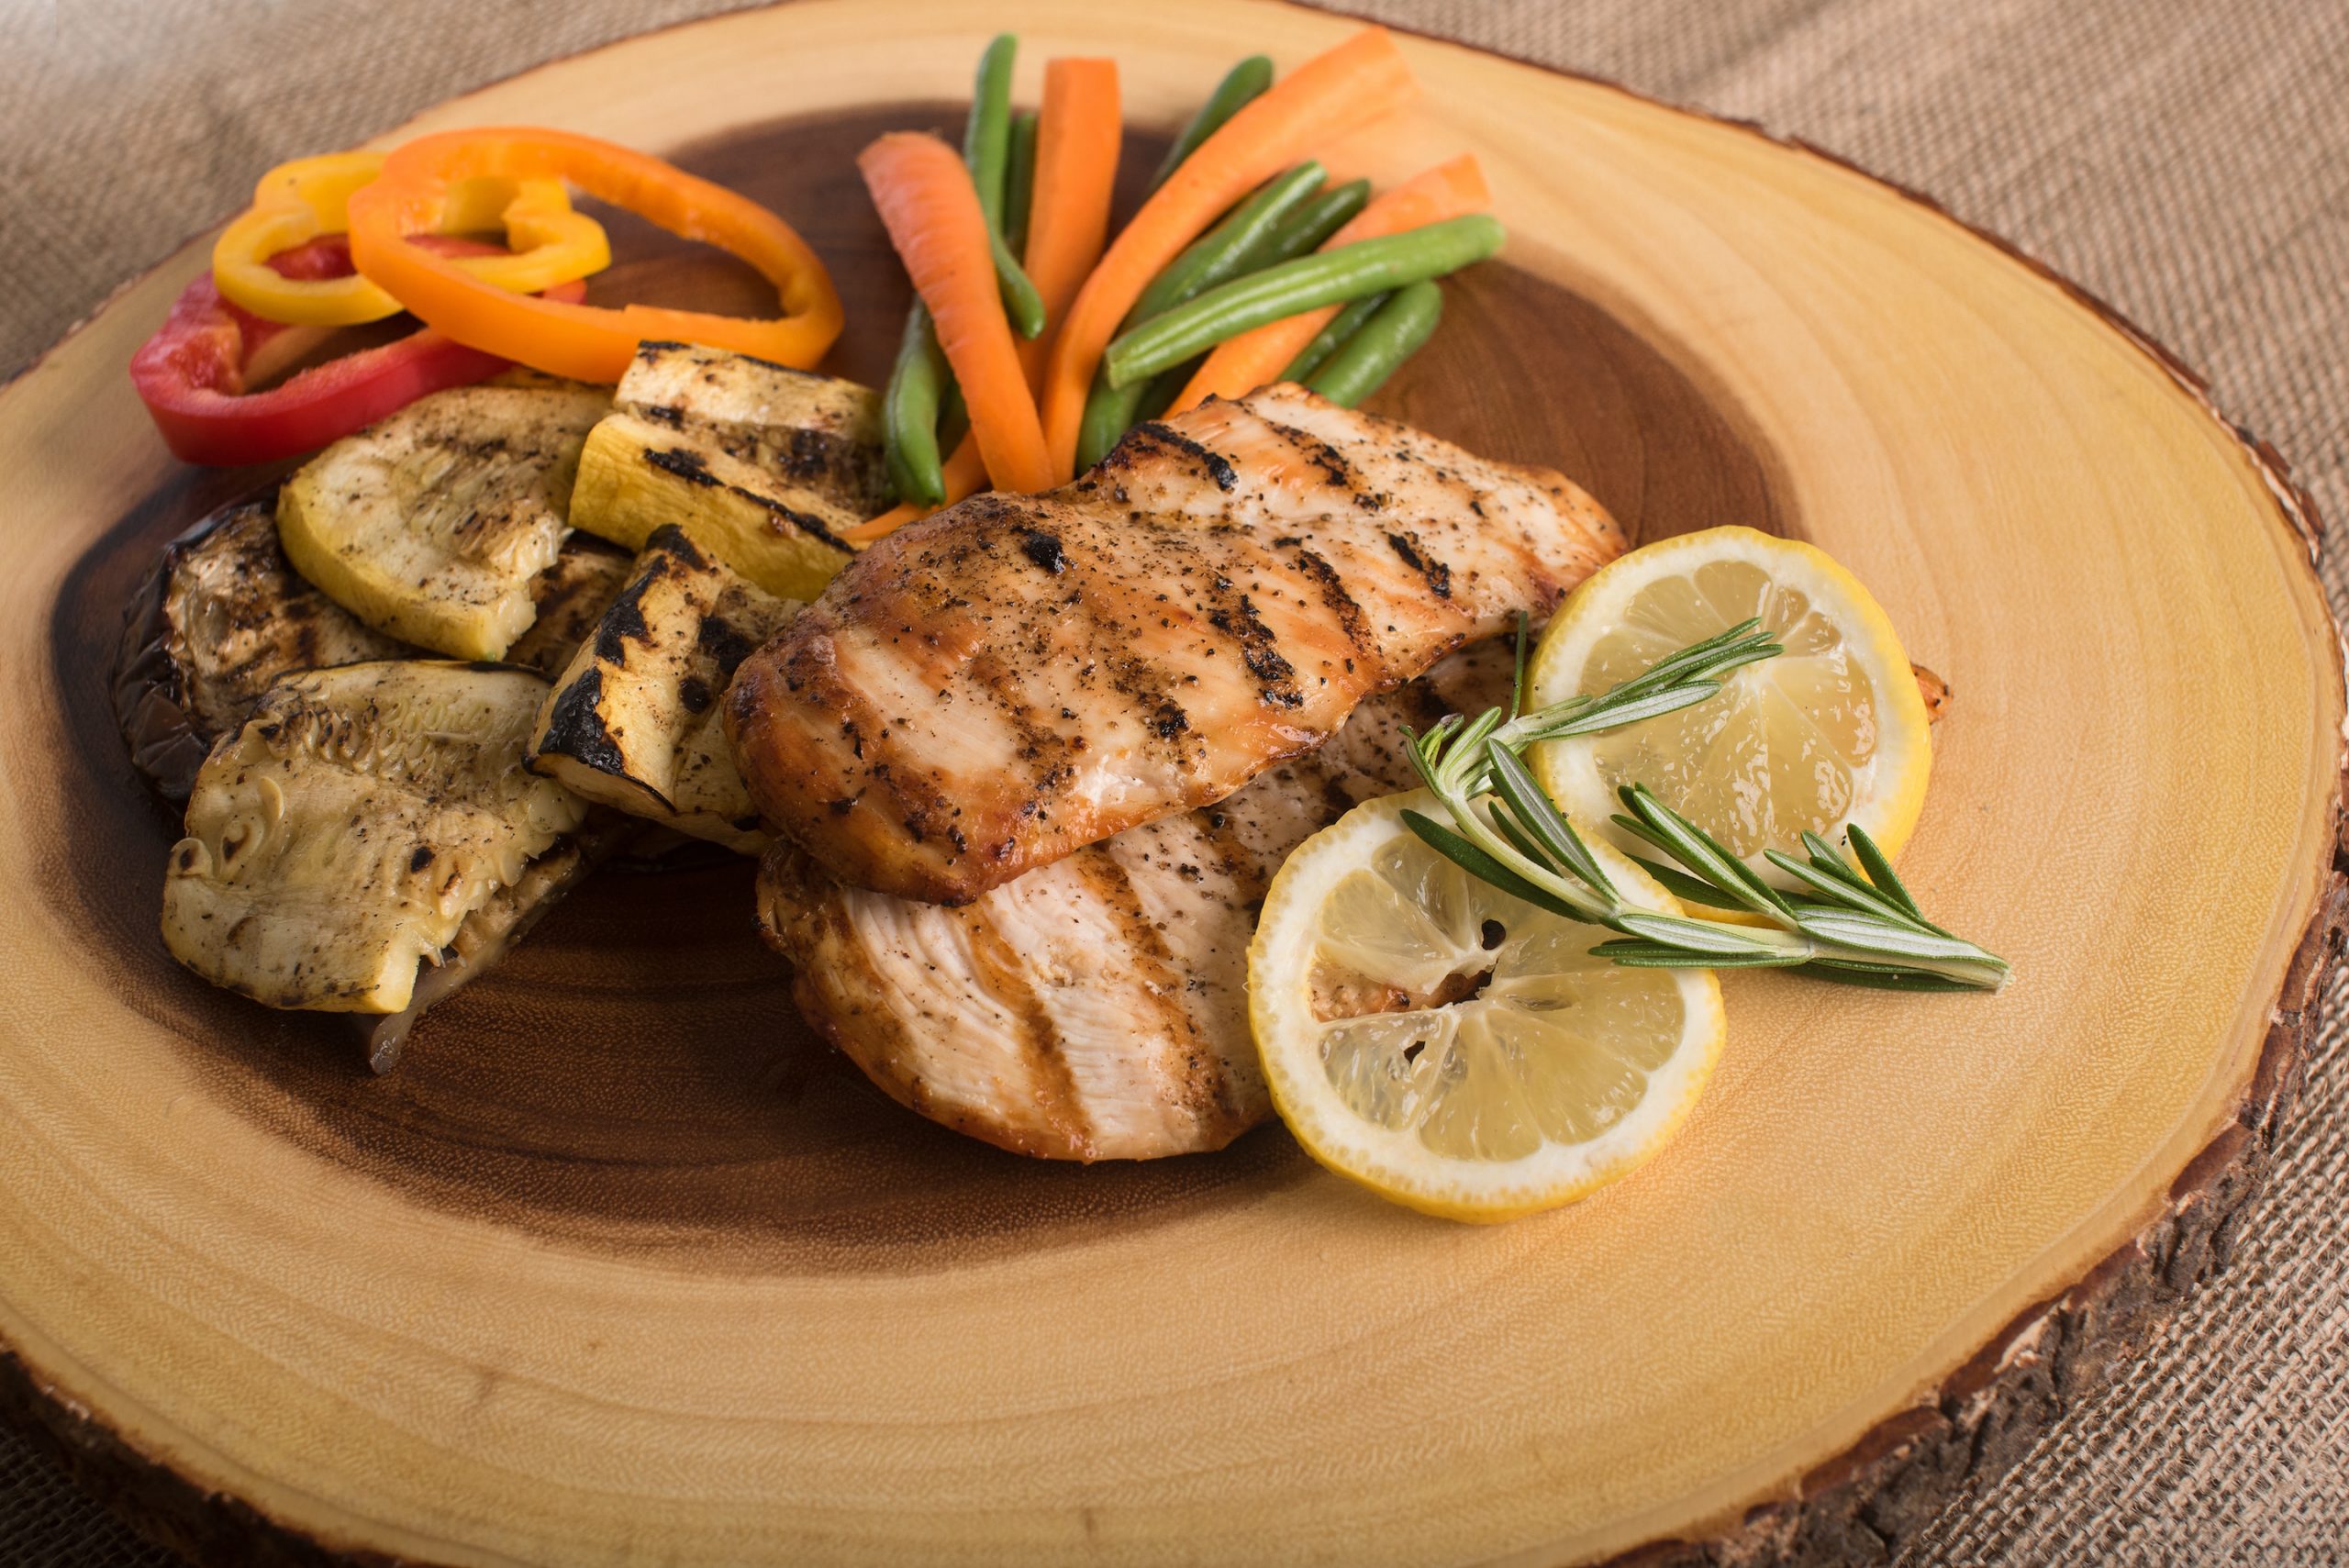 chicken and vegetables on cutting board lose weight